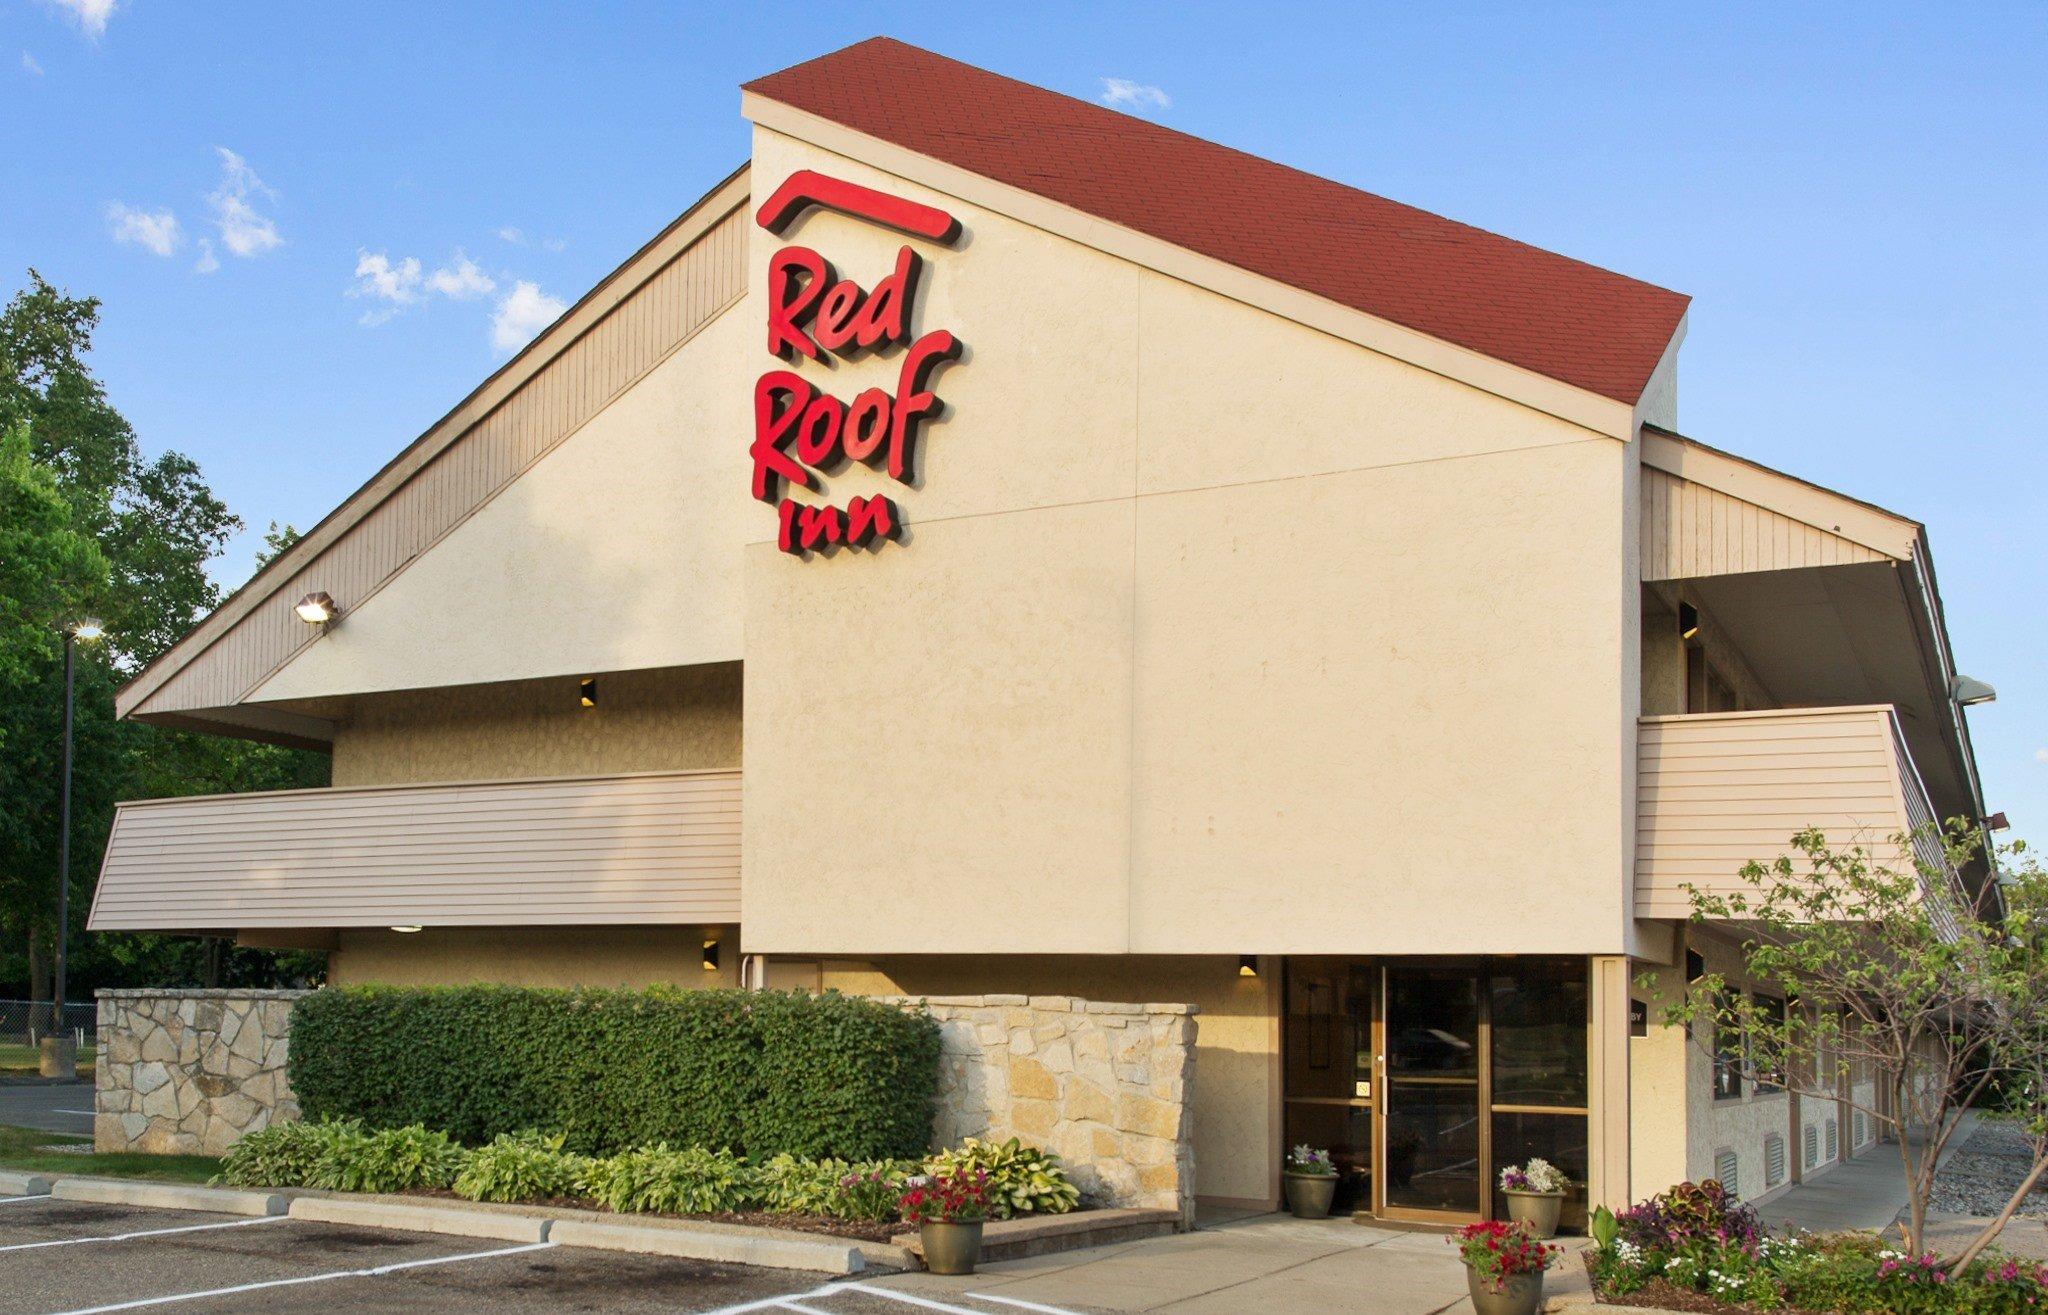 Red Roof Inn Detroit - St Clair Shores image